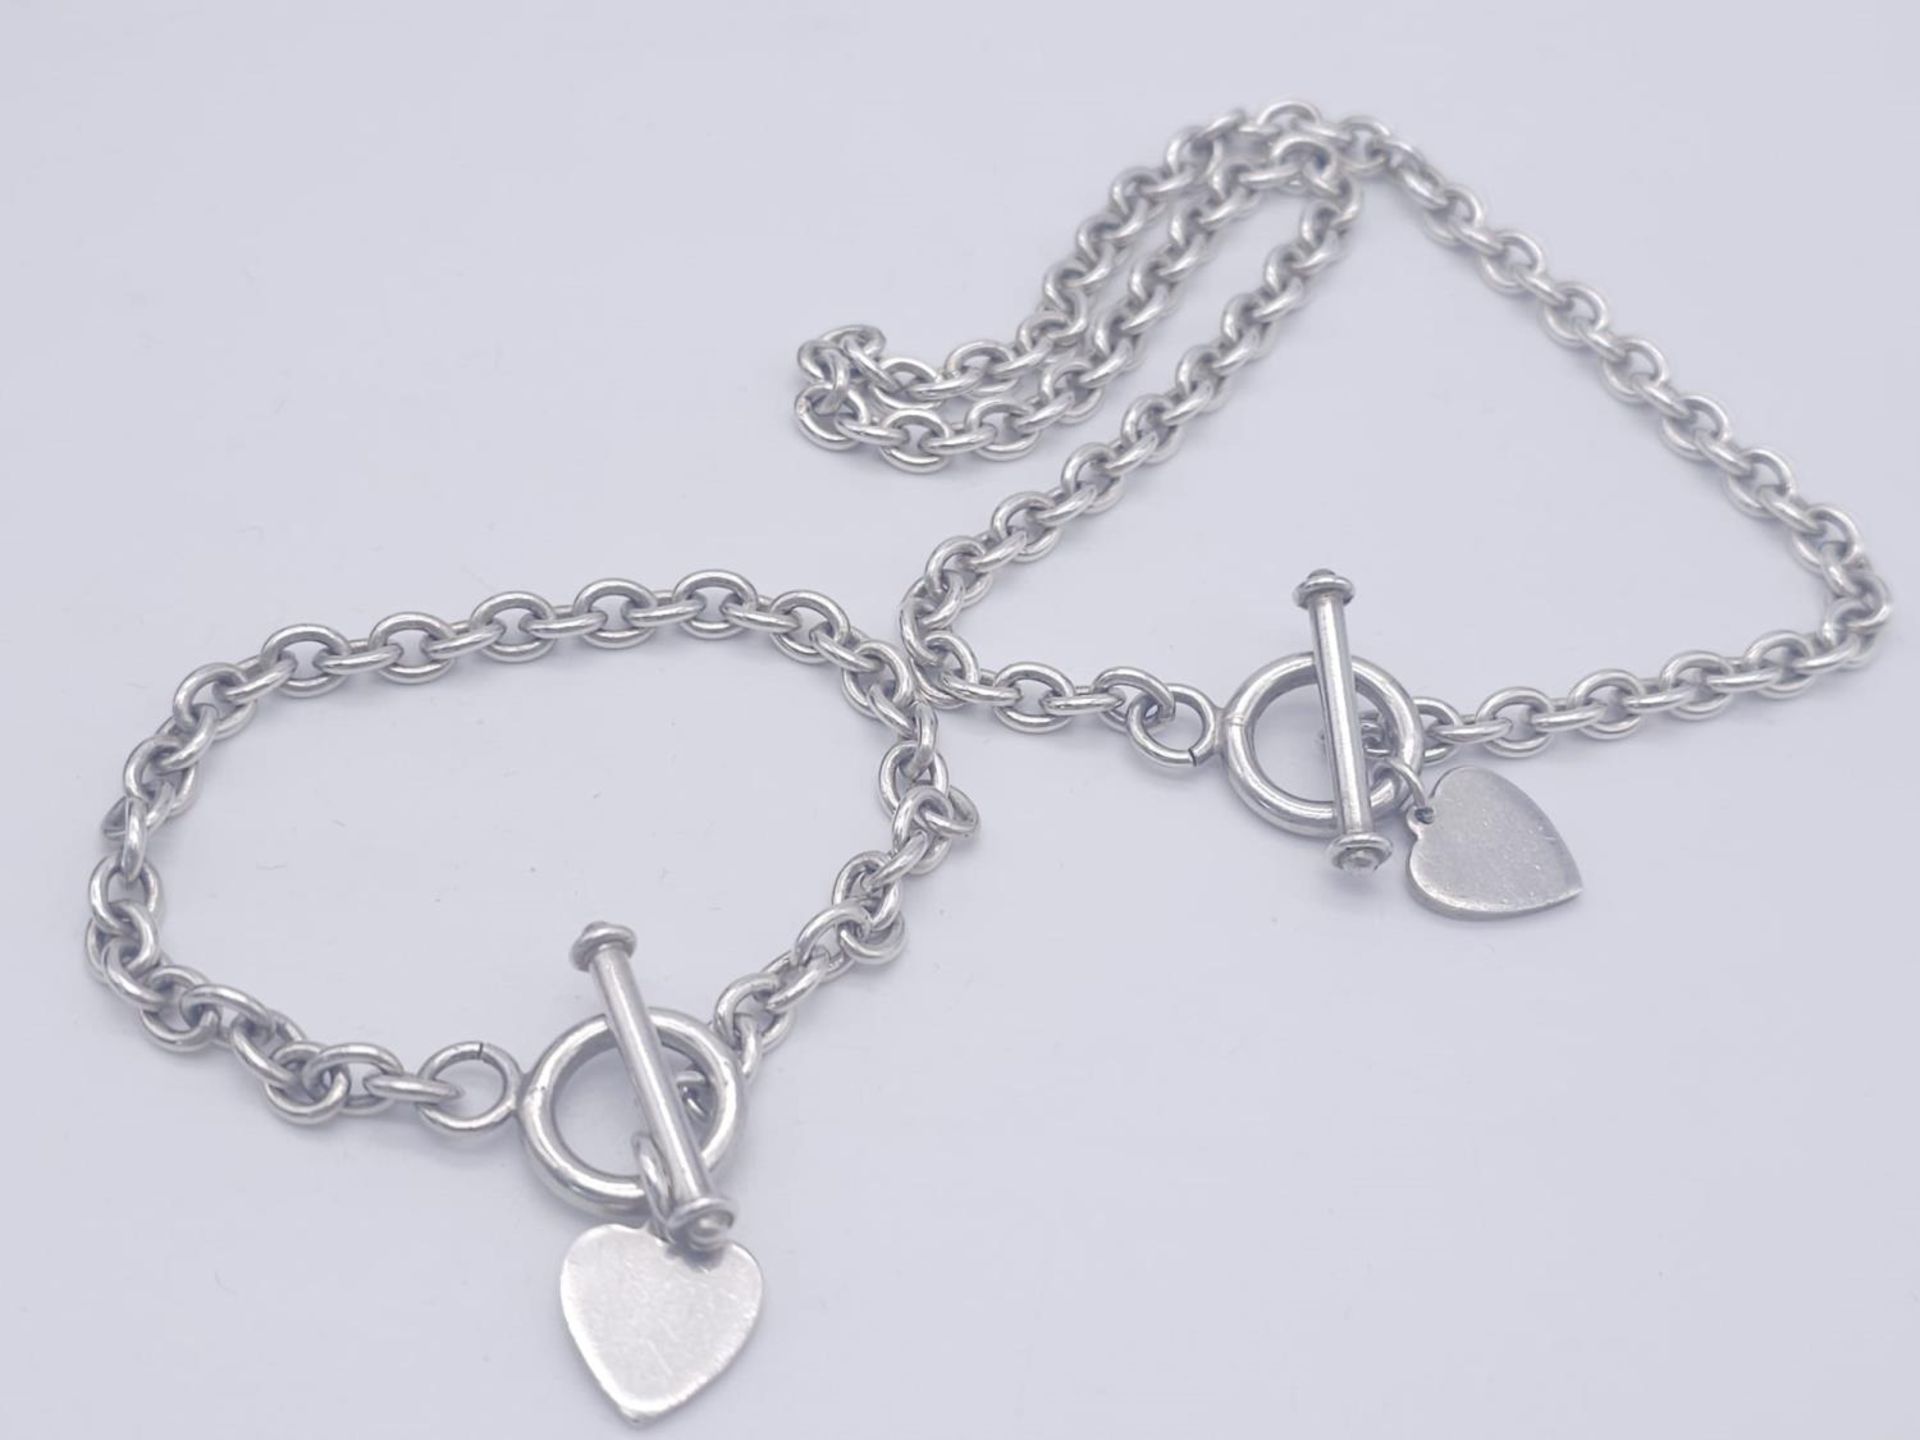 A Sterling silver T-bar heart necklace with matching 20cm bracelet. 54.3g total weight.